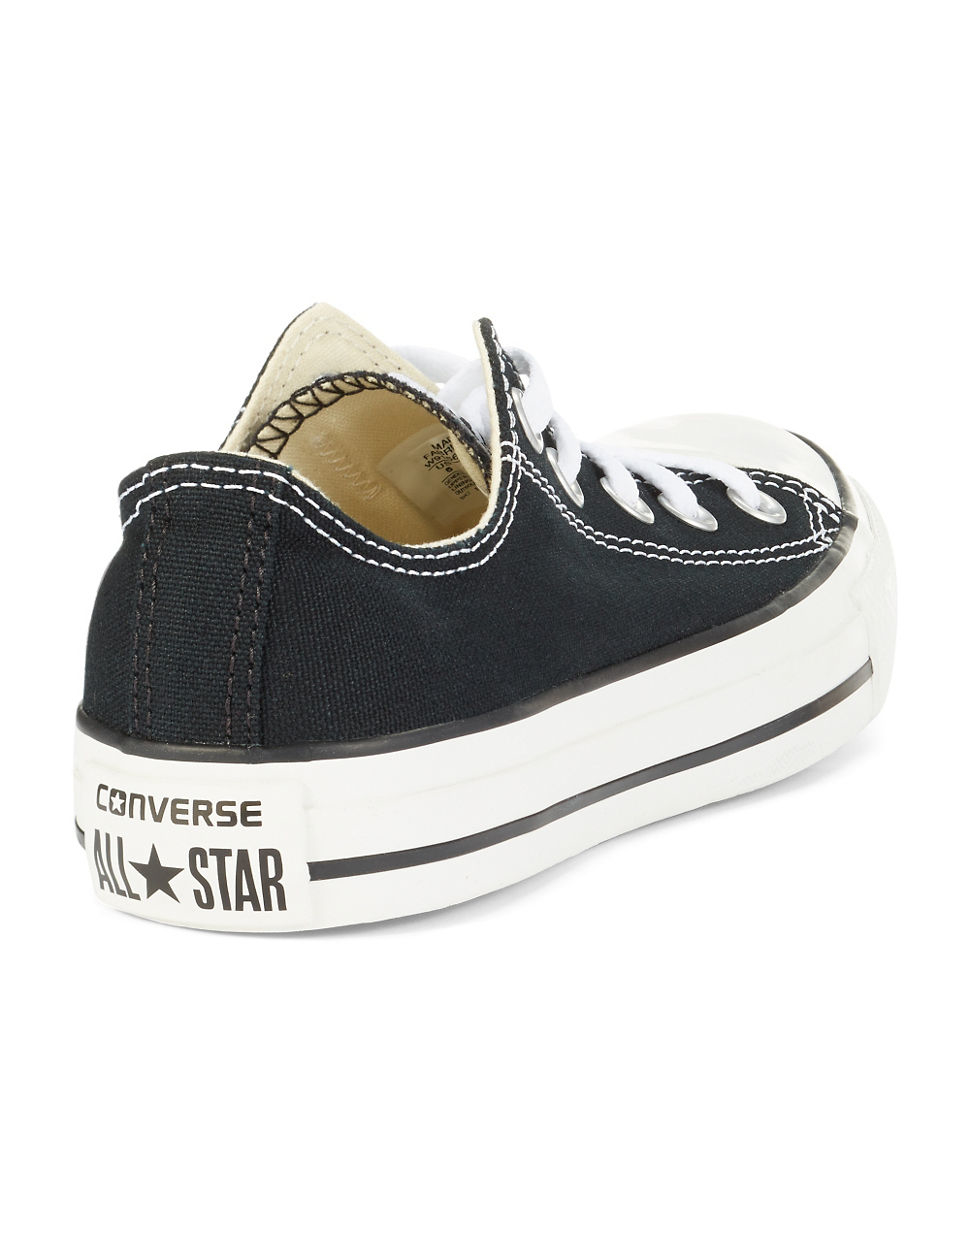 Converse All Star Sneakers in Black | Lyst